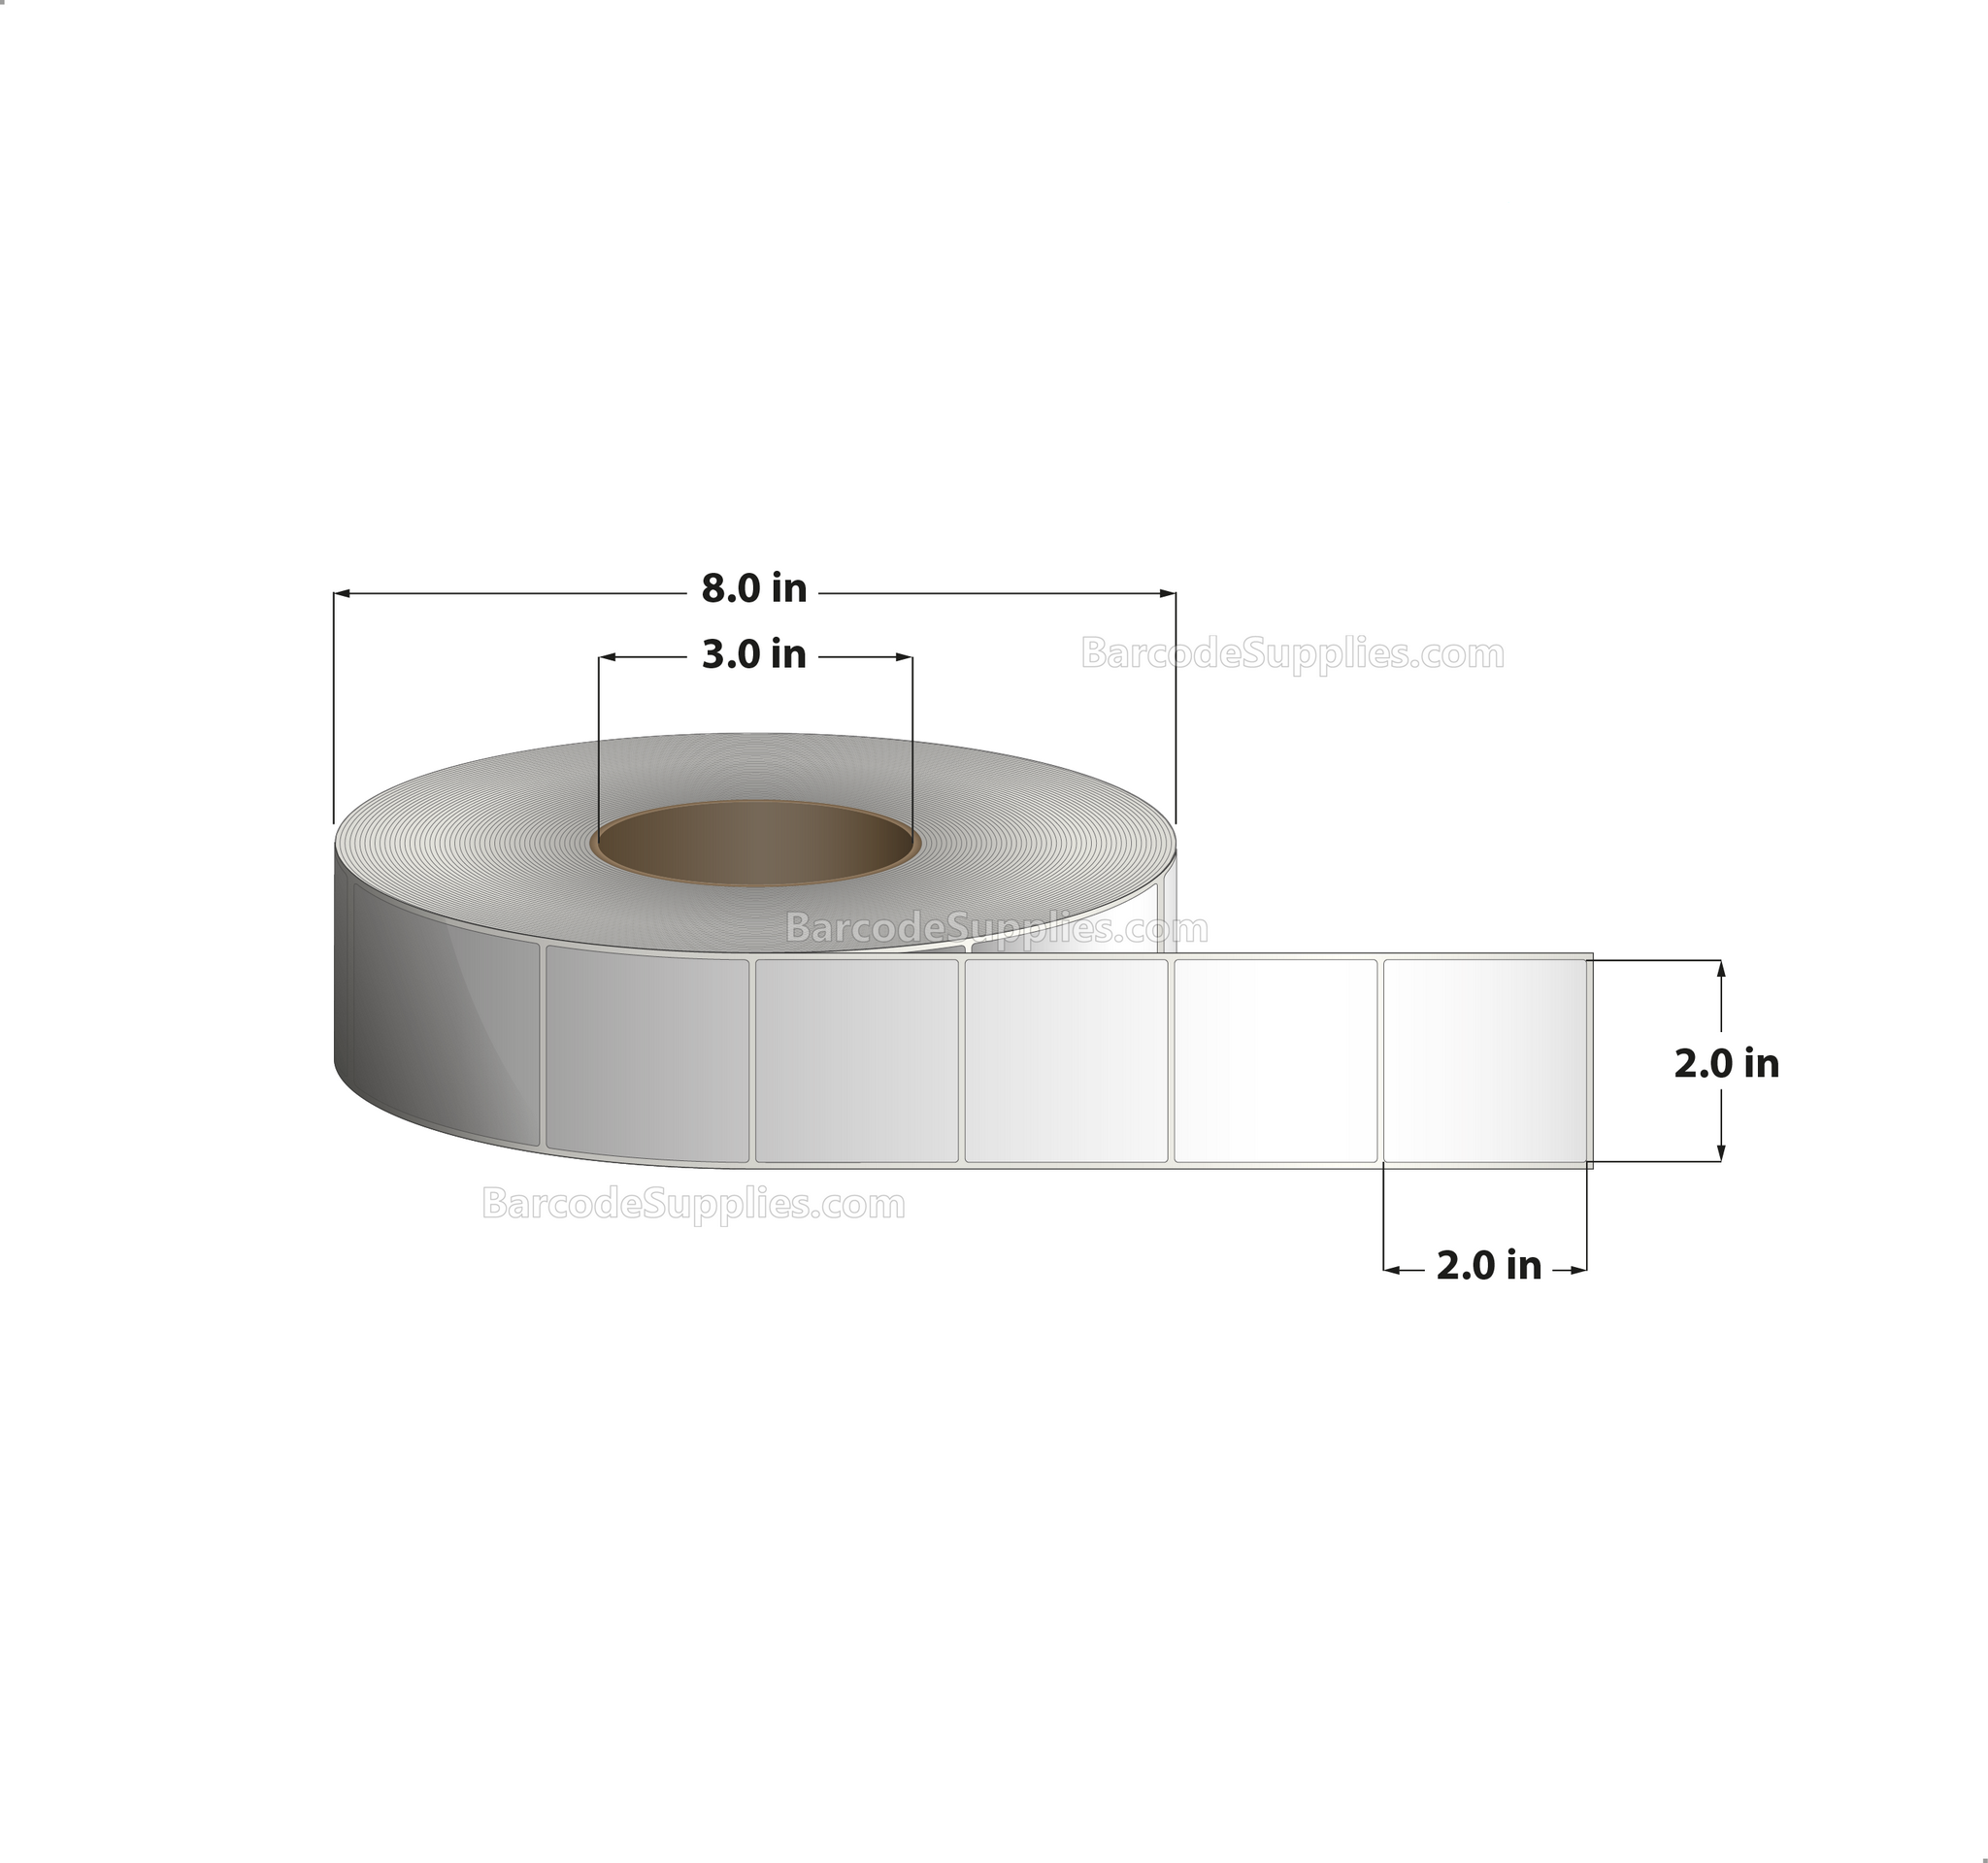 2 x 2 Thermal Transfer White Labels With Permanent Adhesive - No Perforation - 2900 Labels Per Roll - Carton Of 8 Rolls - 23200 Labels Total - MPN: RT-2-2-2900-NP